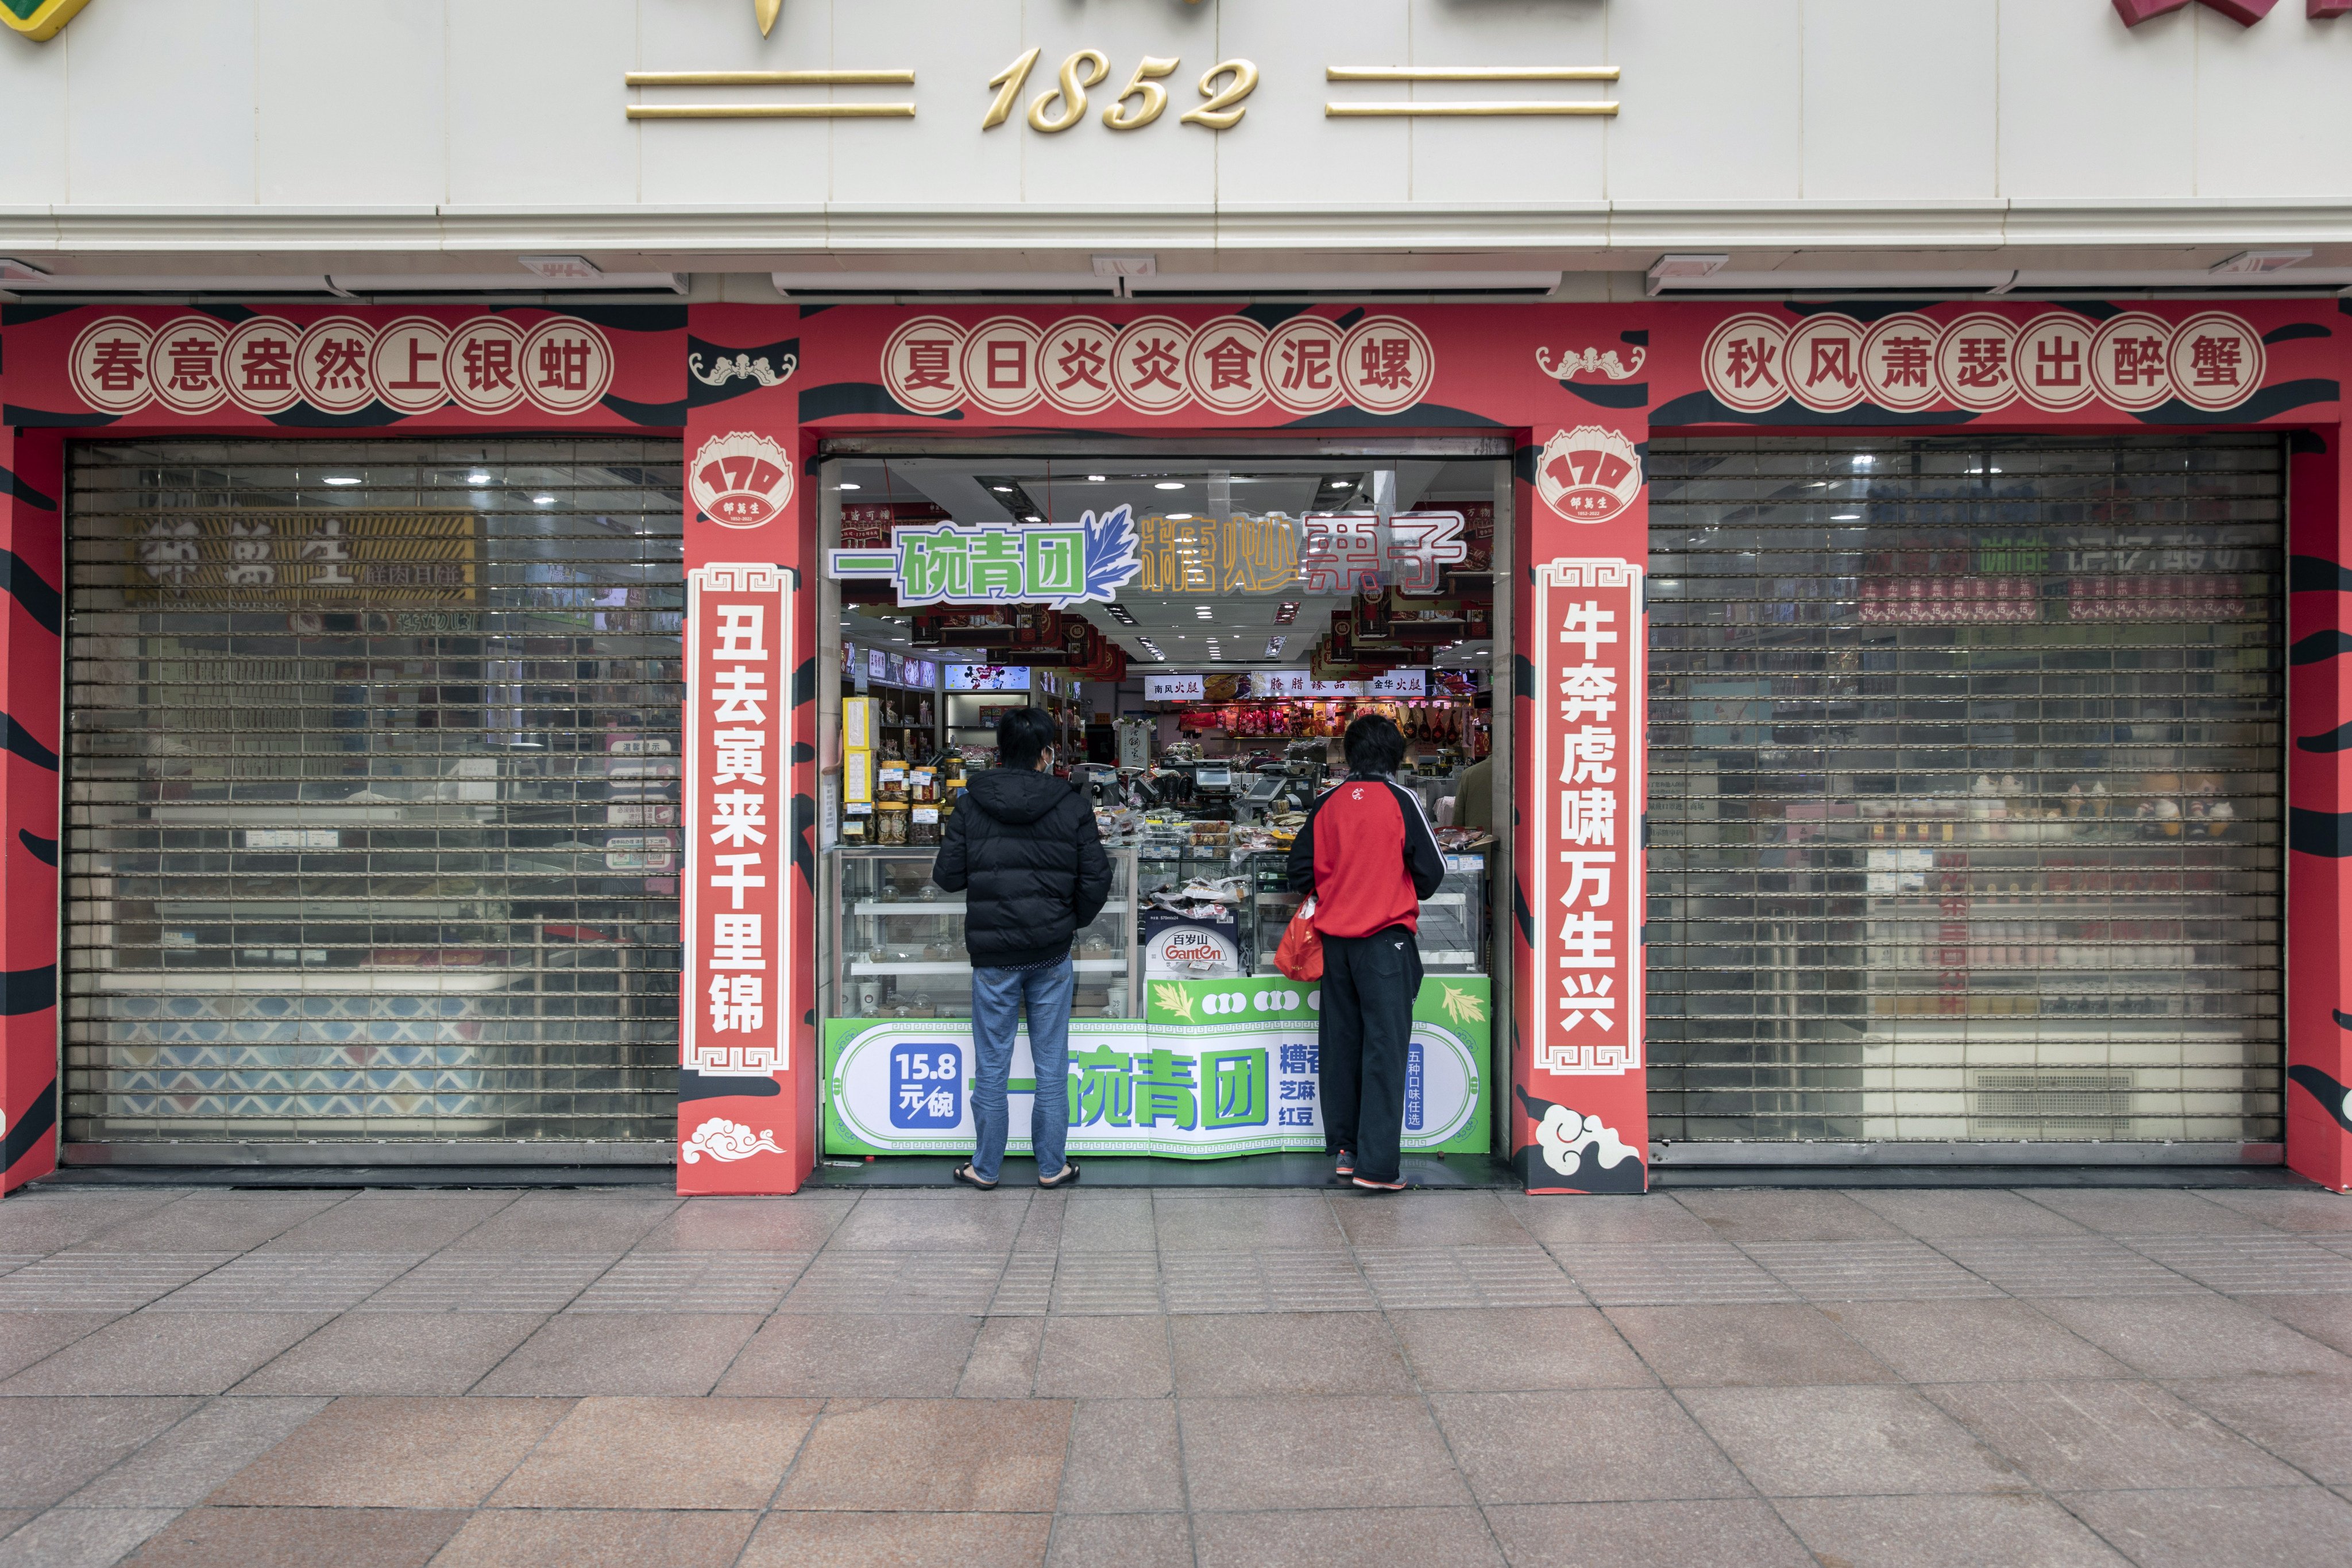 A store along Shanghai’s normally bustling Nanjing Road, outside of coronavirus lockdown areas, operates with a bare-bones staff as most people stay home. Photo: Bloomberg